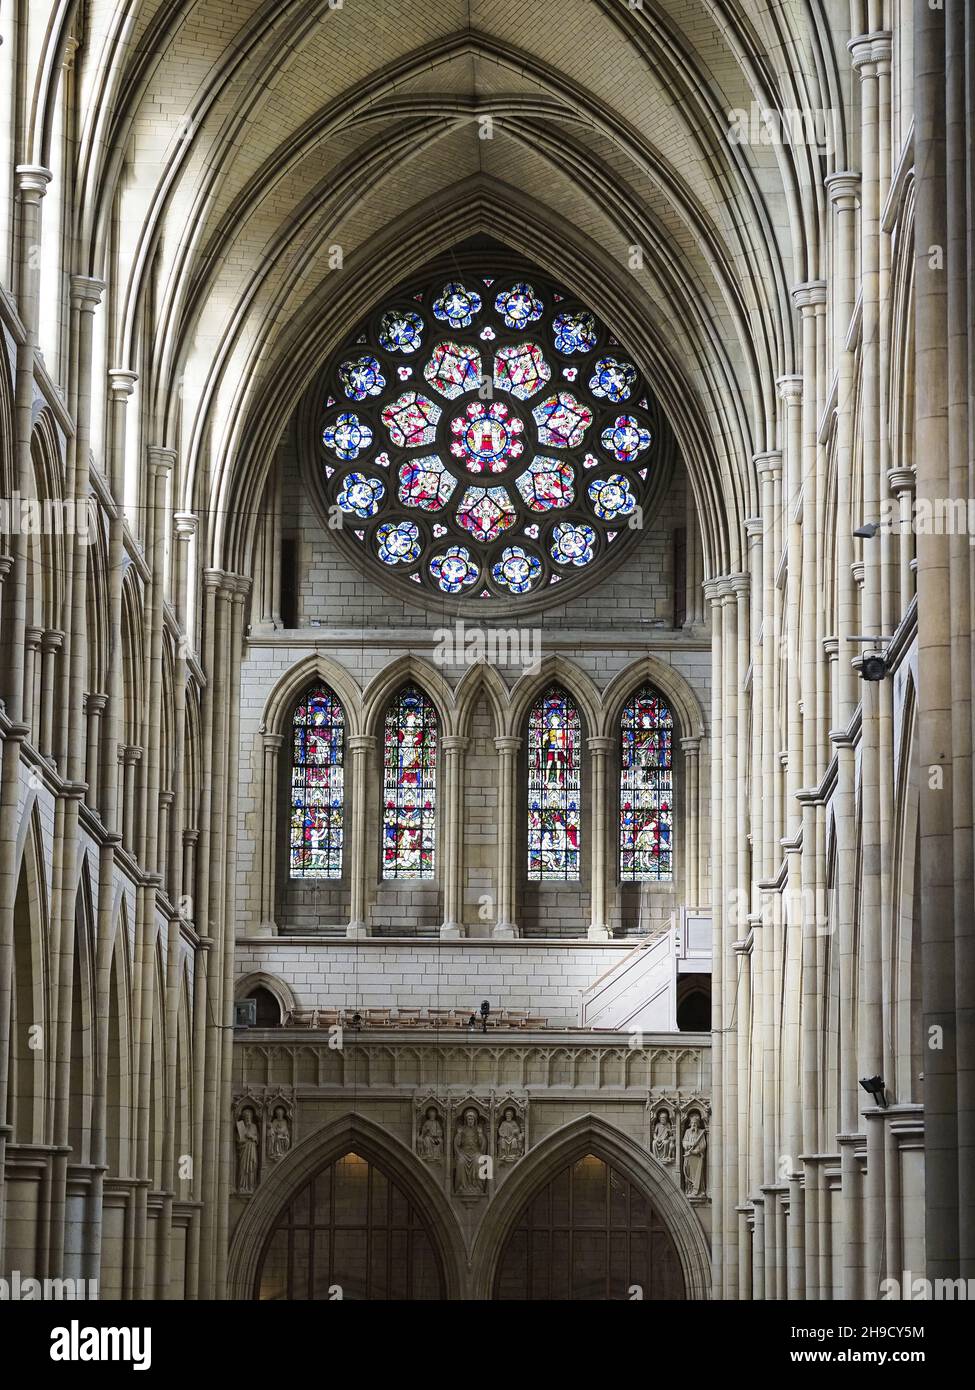 Interiors of Truro Cathedral in Cornwall England Stock Photo